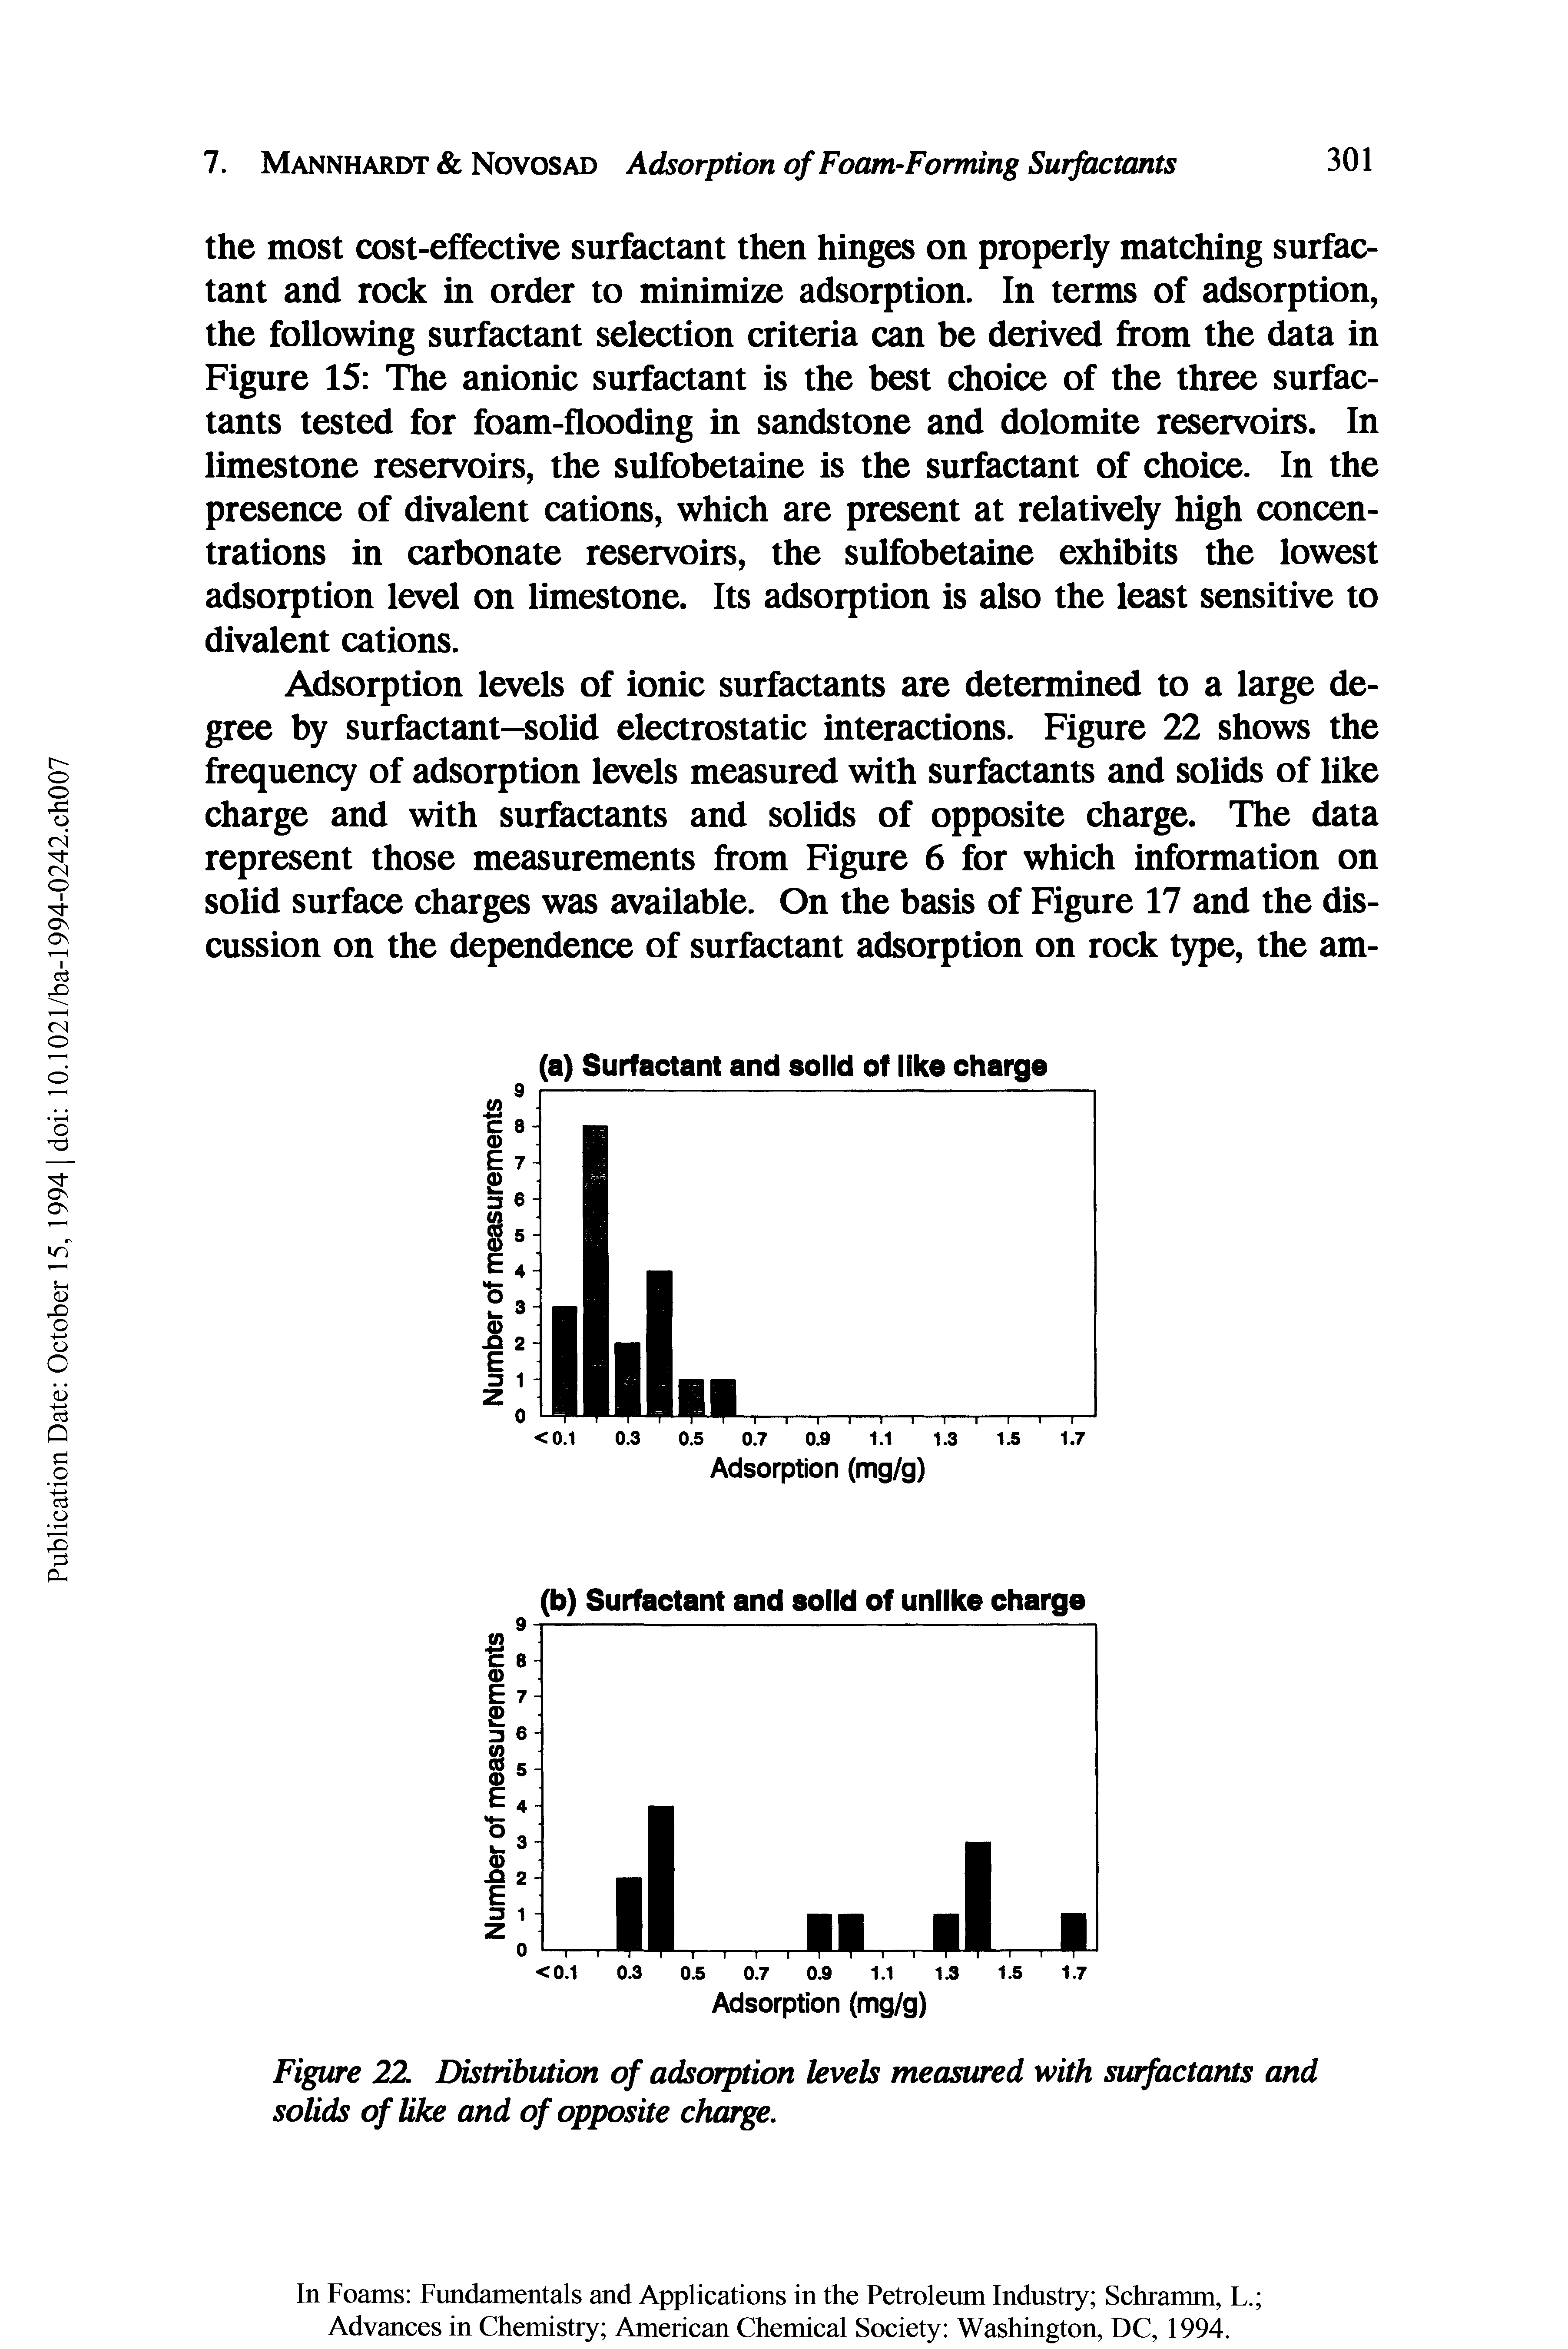 Figure 22 Distribution of adsorption levels measured with surfactants and solids of like and of opposite charge.